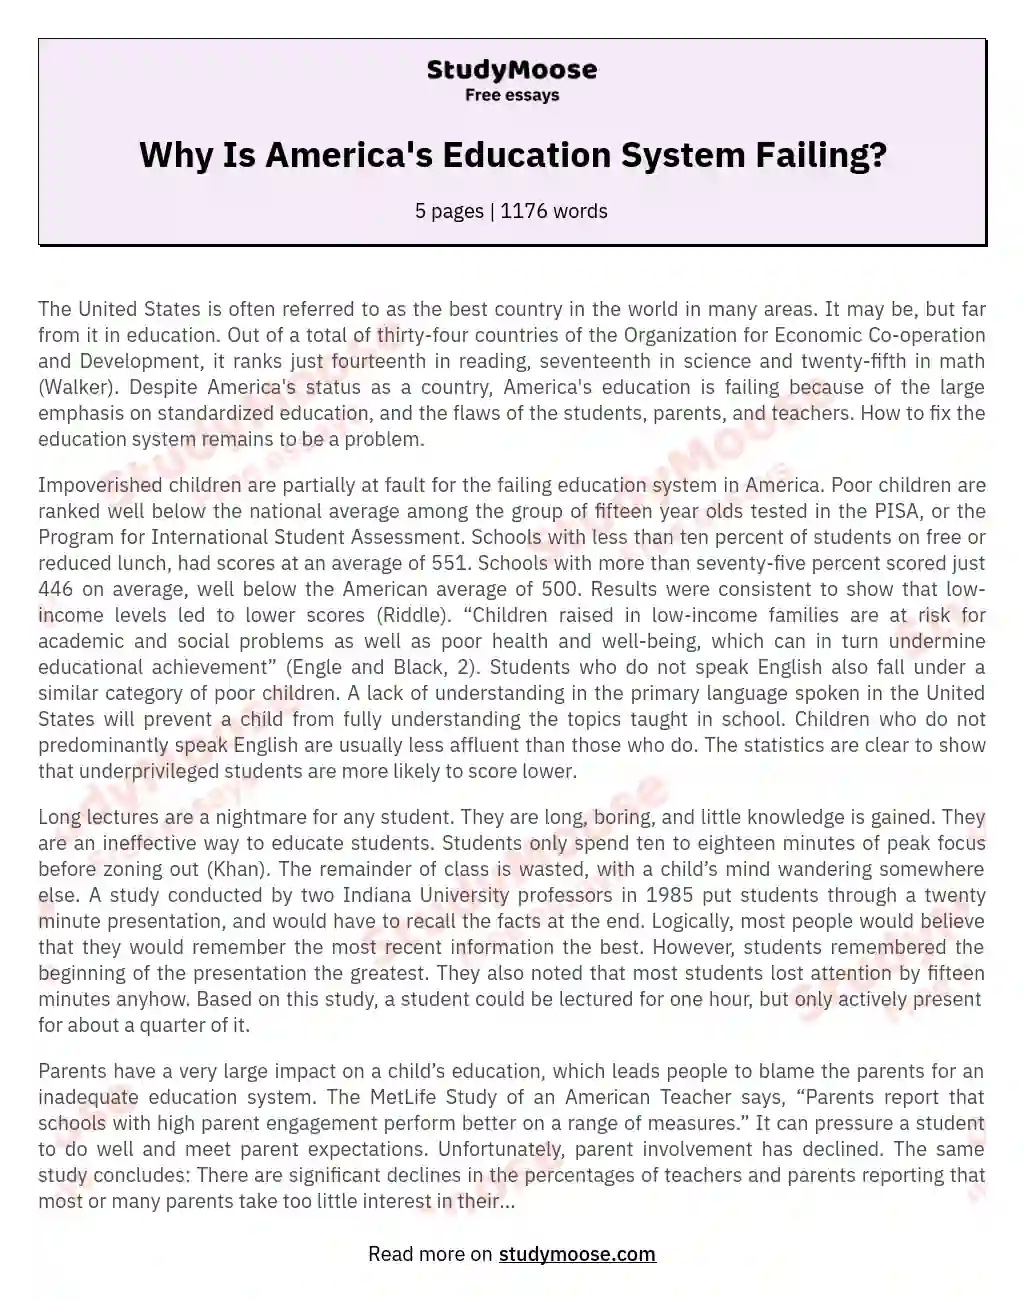 why is the american education system failing essay